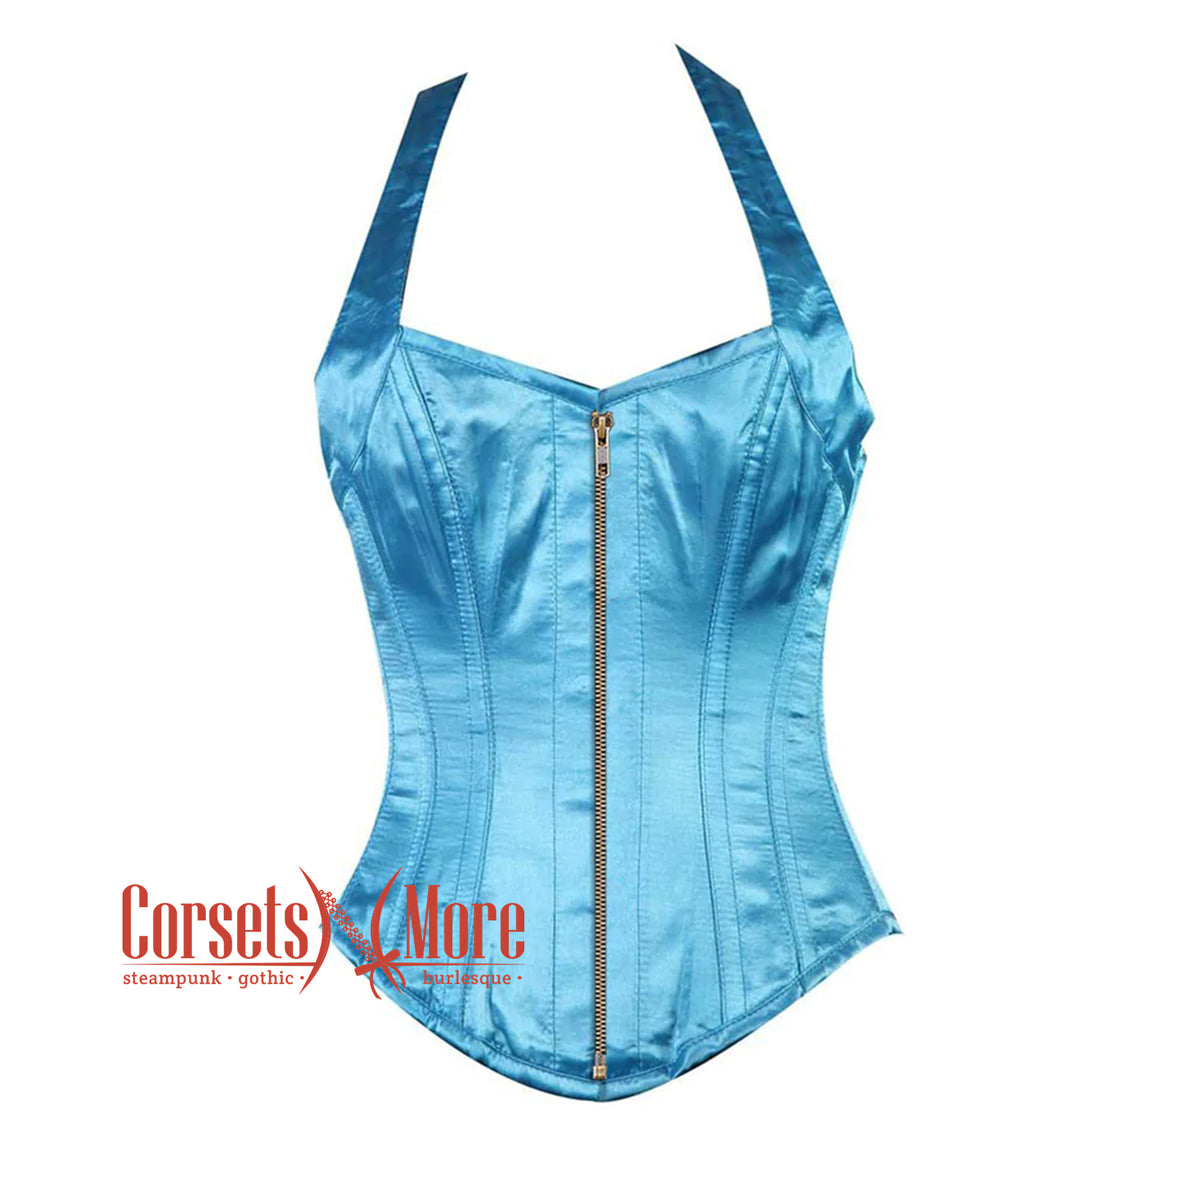 Baby Blue Lace Bustier Corset Top With Implemented Boning